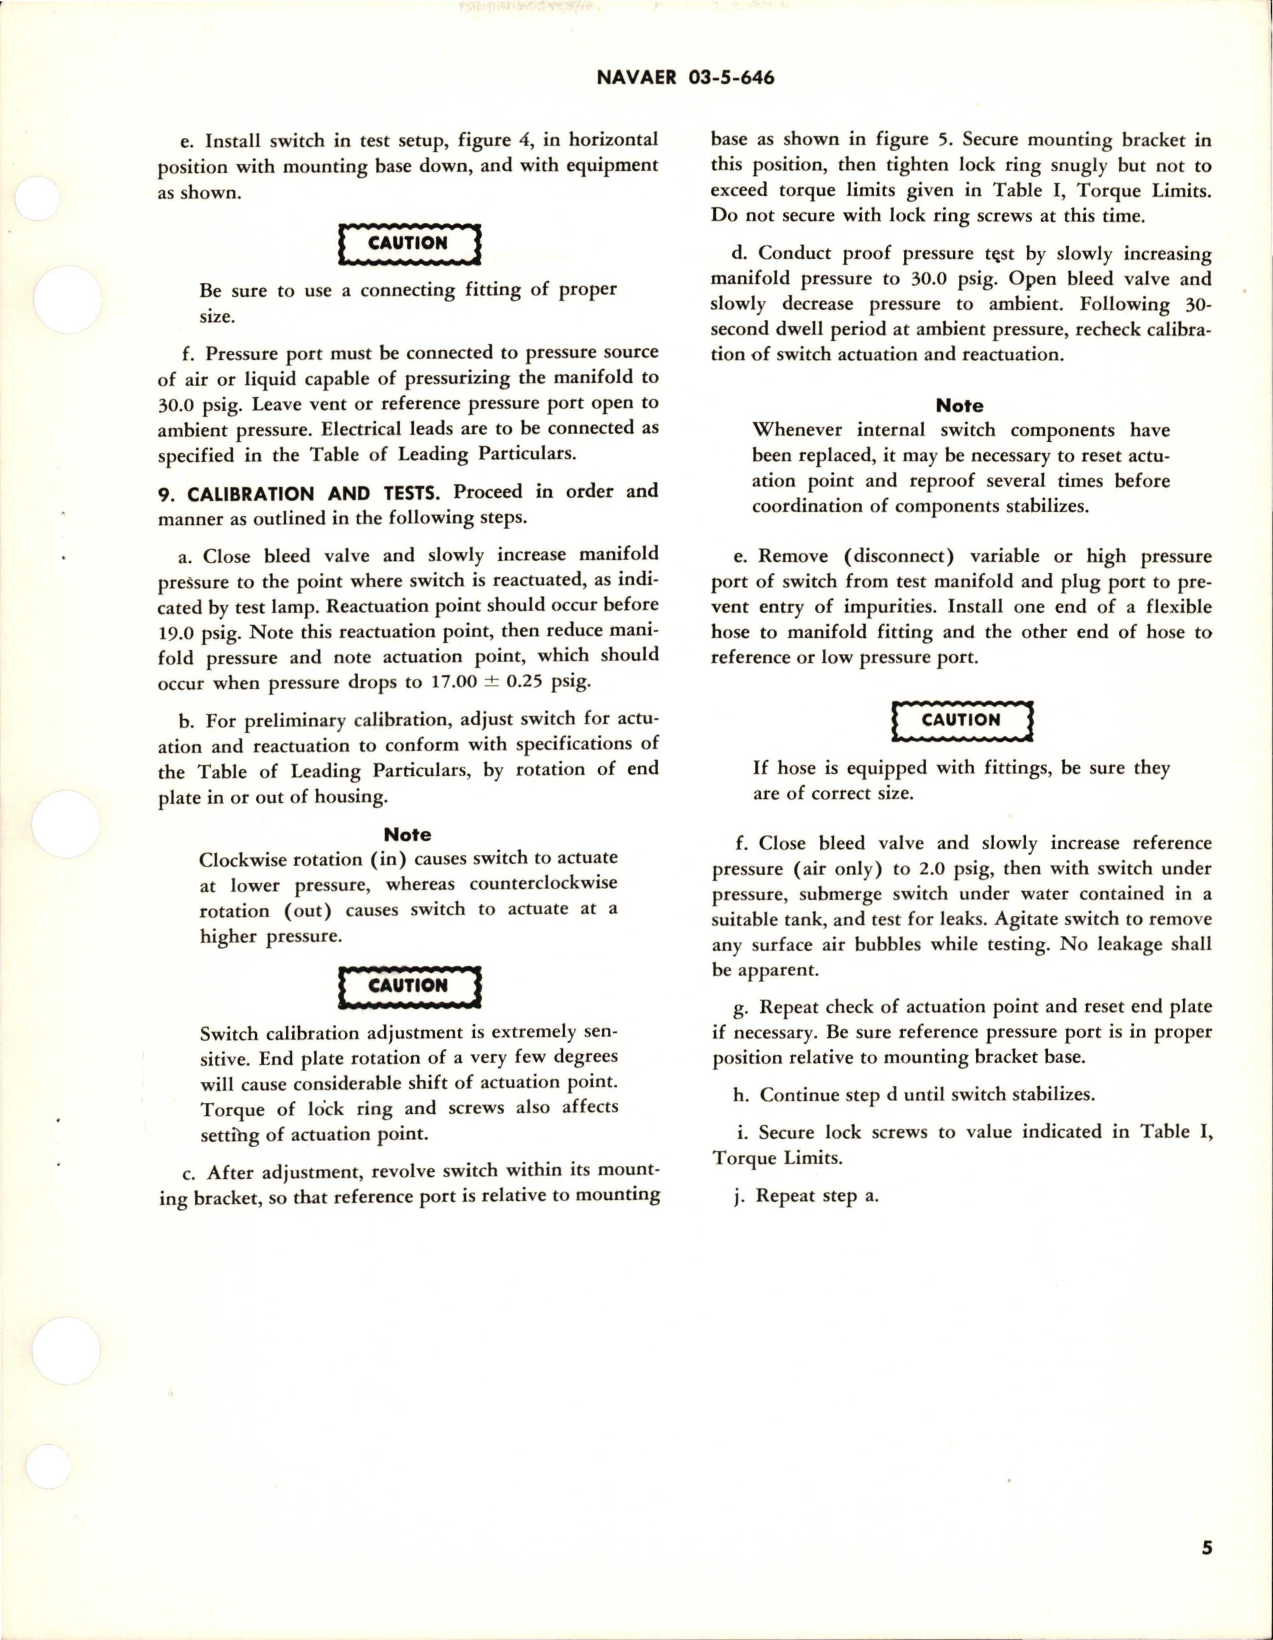 Sample page 5 from AirCorps Library document: Overhaul Instructions with Parts Breakdown for Pressure Actuated Switch - Part 417-11BL-61